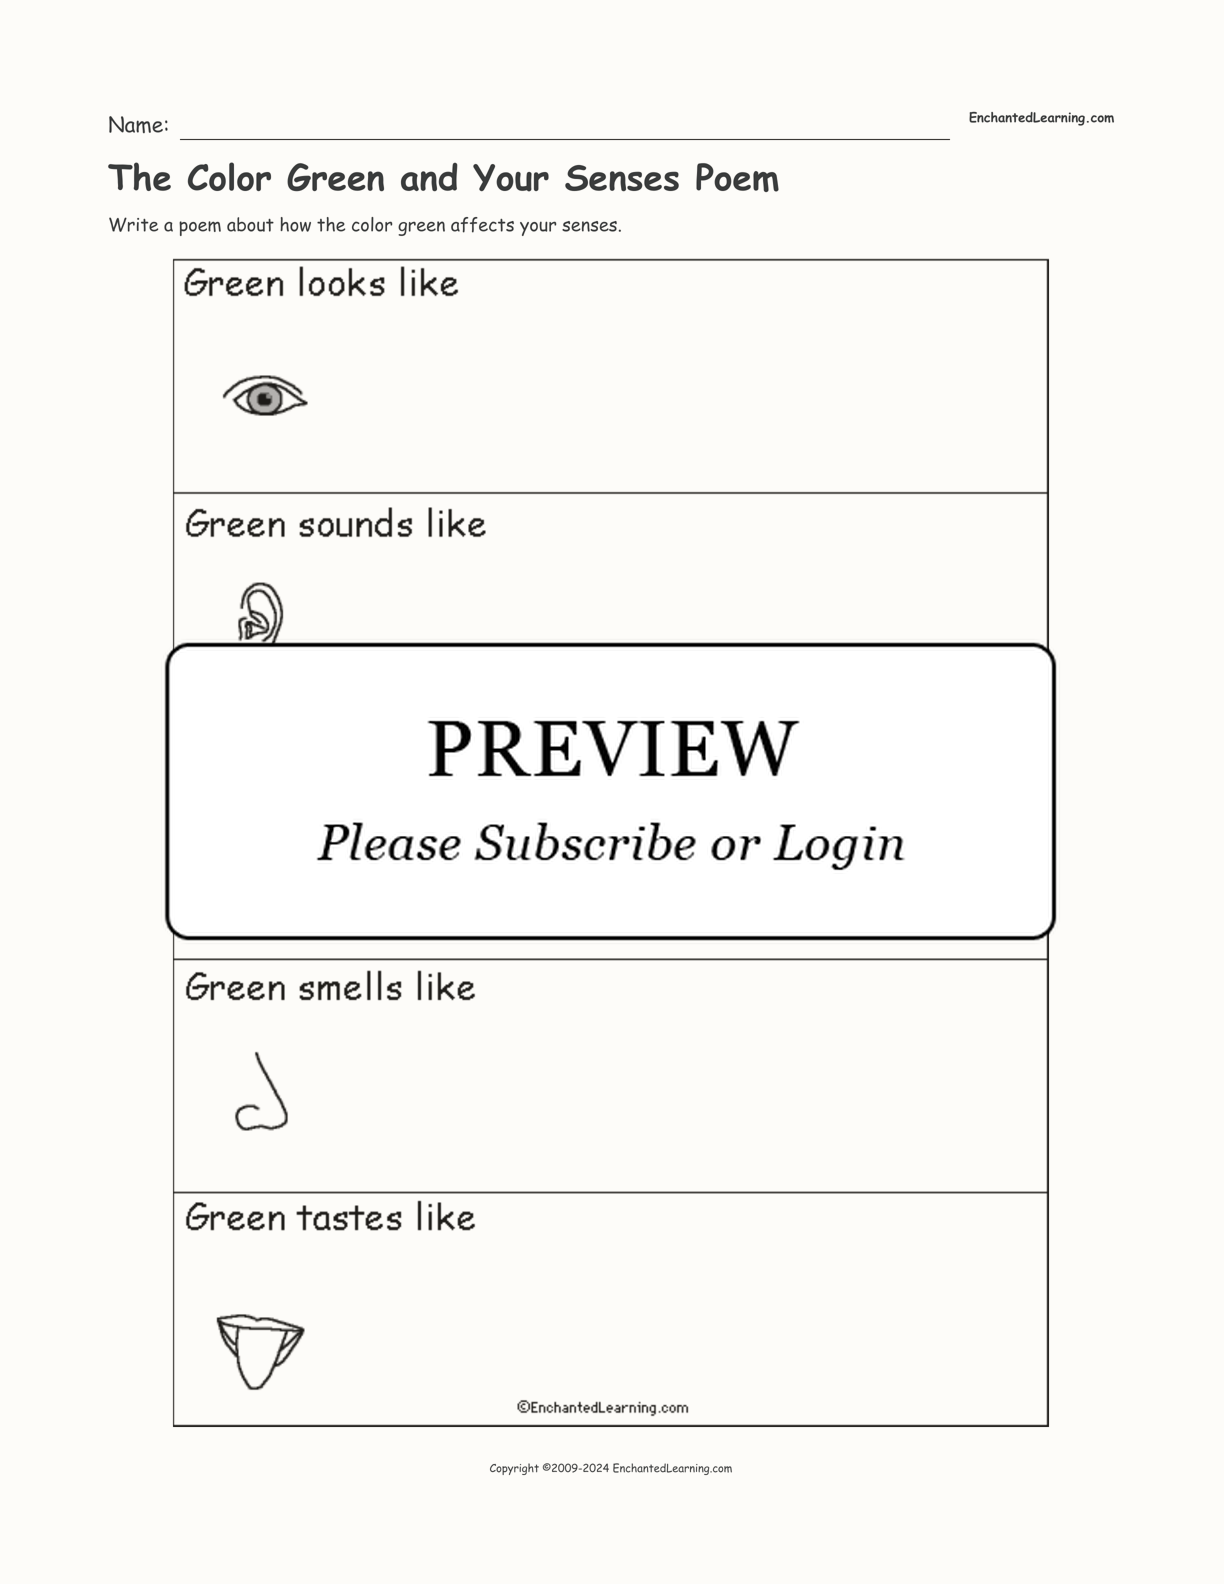 The Color Green and Your Senses Poem interactive worksheet page 1